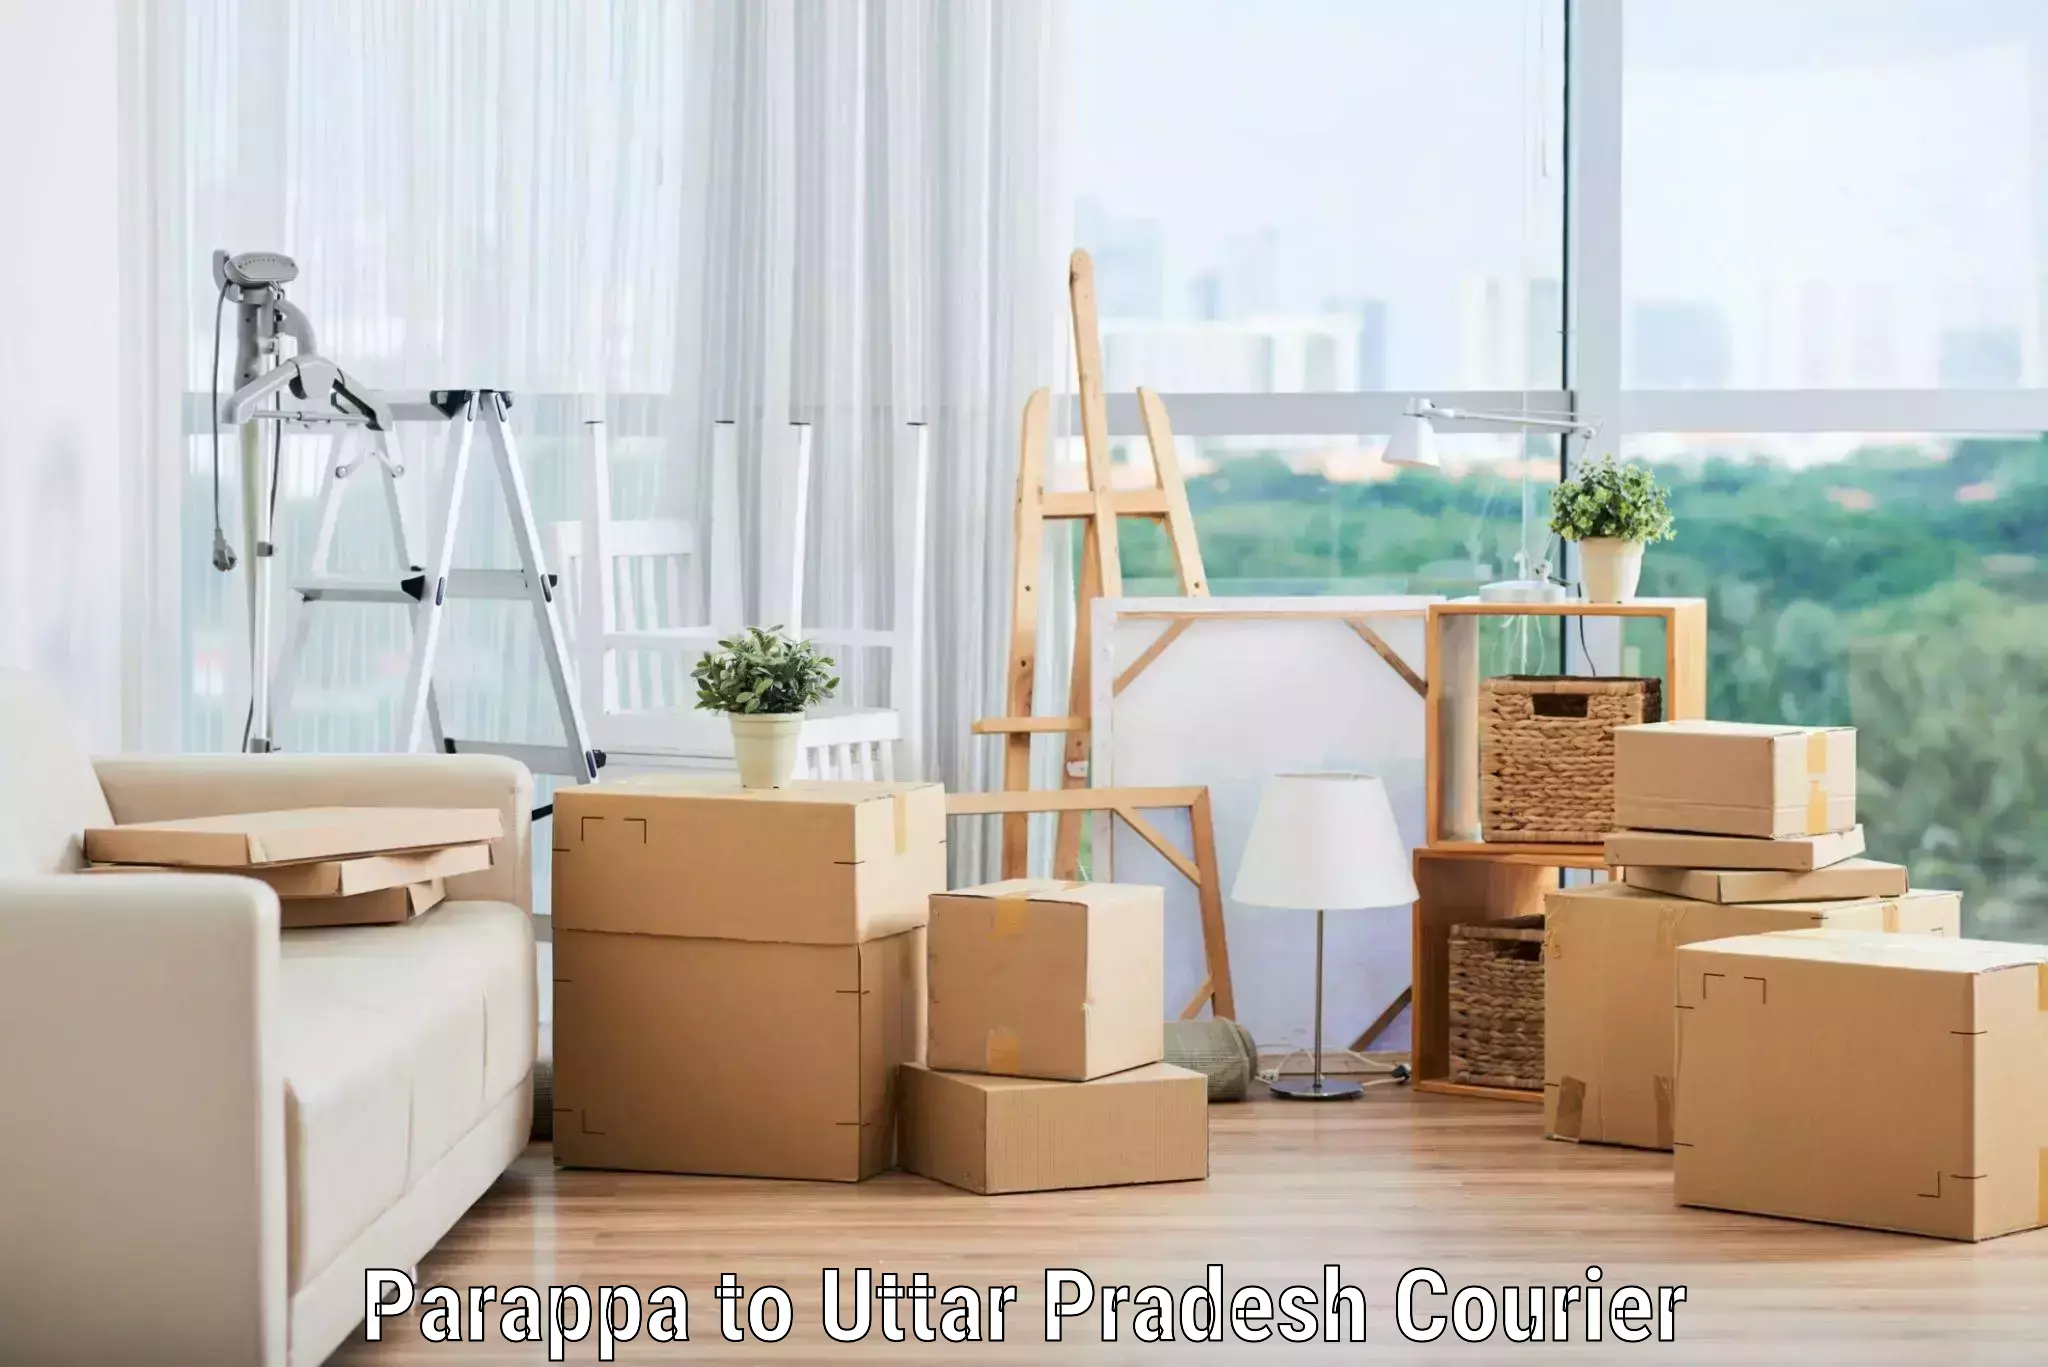 Trusted furniture transport Parappa to Fatehabad Agra